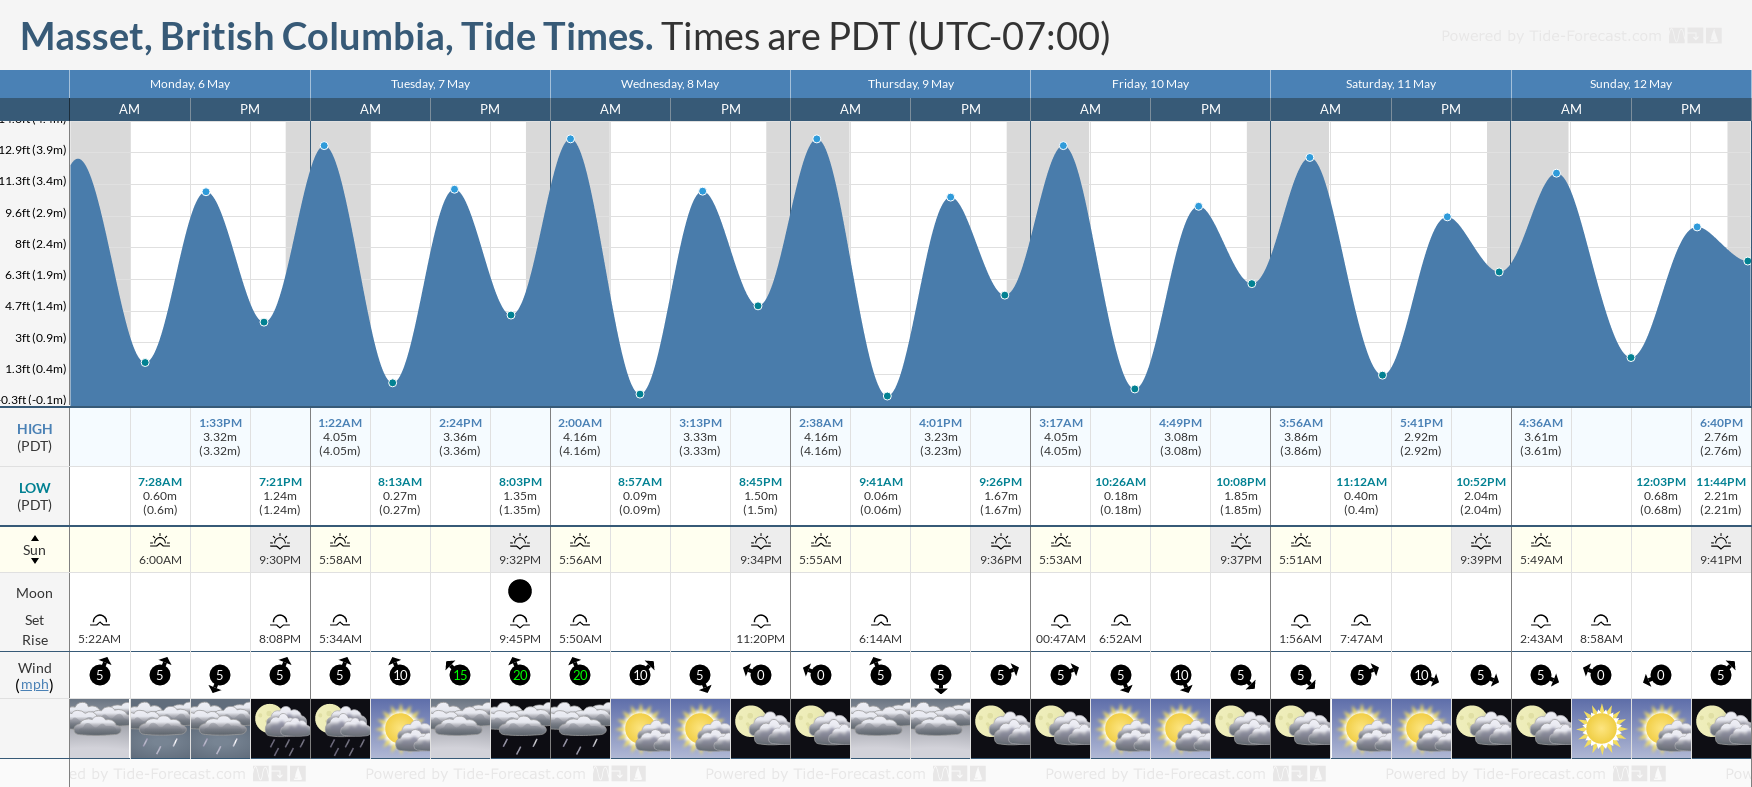 Masset, British Columbia Tide Chart including high and low tide tide times for the next 7 days